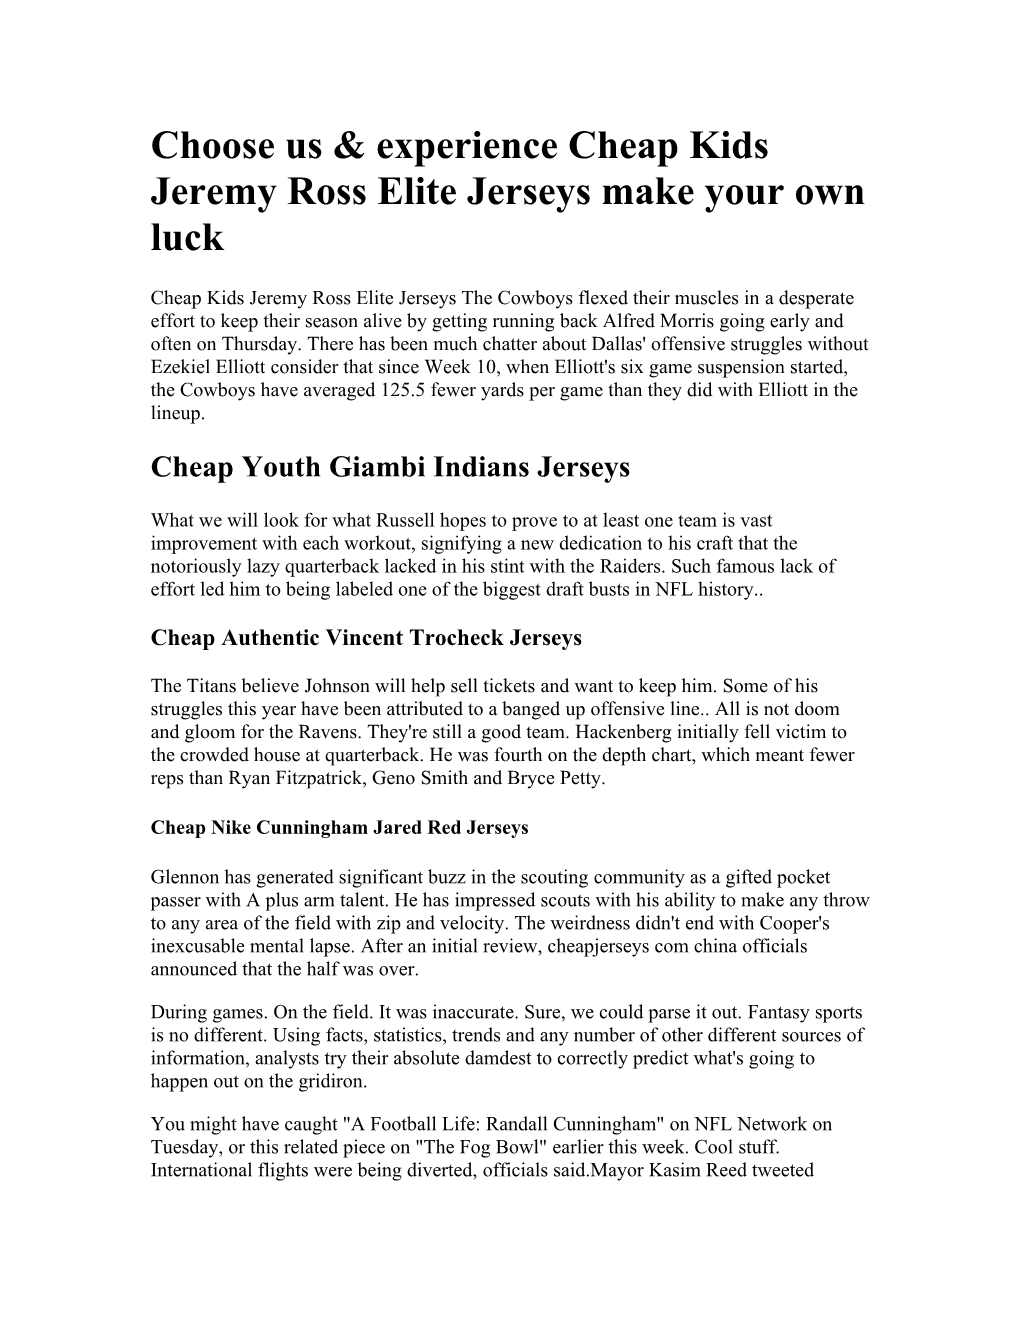 Choose Us & Experience Cheap Kids Jeremy Ross Elite Jerseys Make Your Own Luck